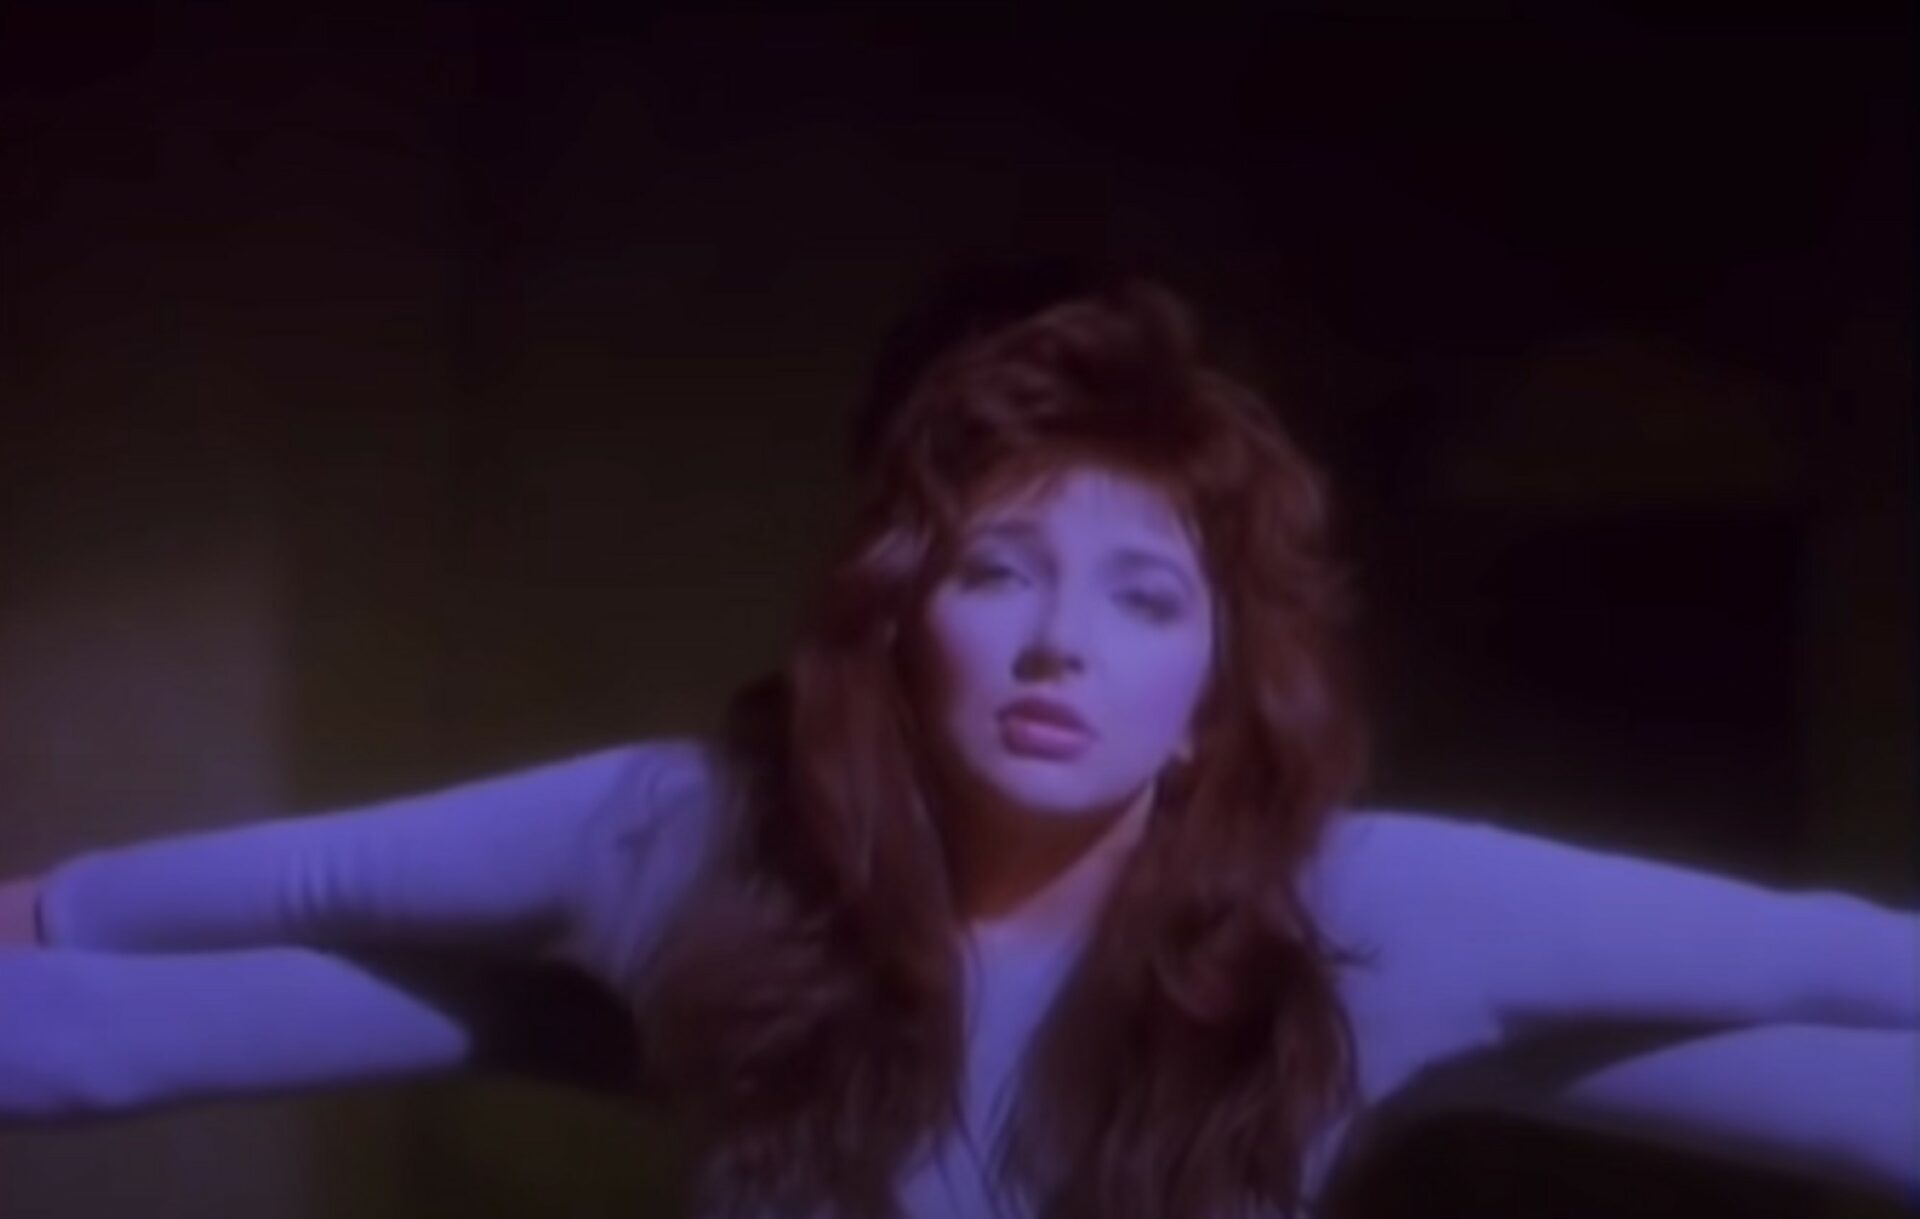 Kate Bush breaks three world records with 'Running Up That Hill